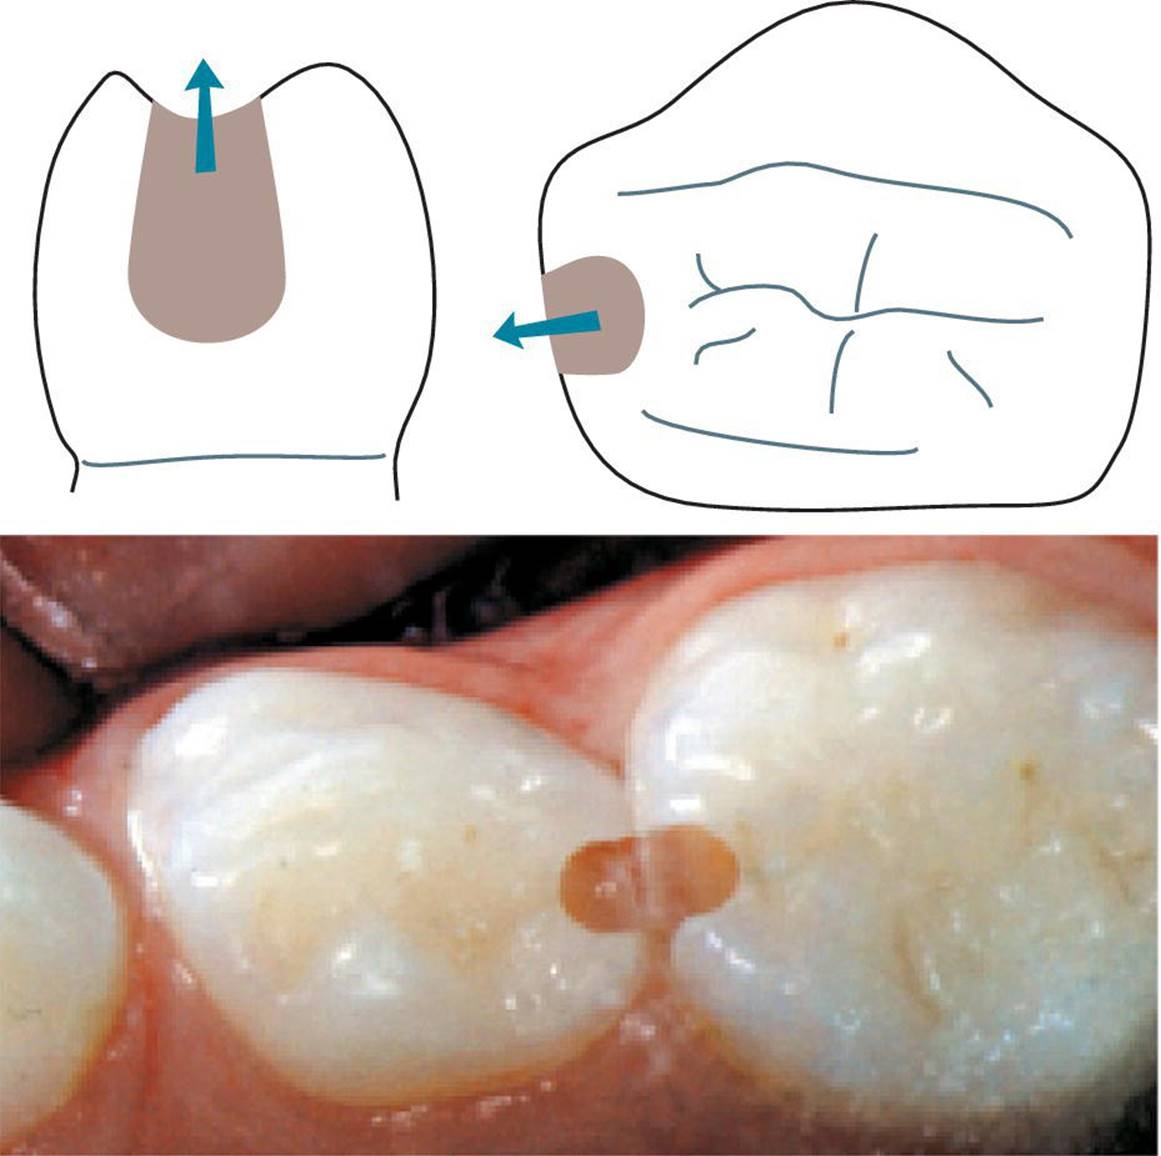 Top: Illustration of the primary molar teeth with cavity outline represented by shaded areas and arrows indicating the direction. Bottom: Photo of primary molars teeth with small cavities removed.